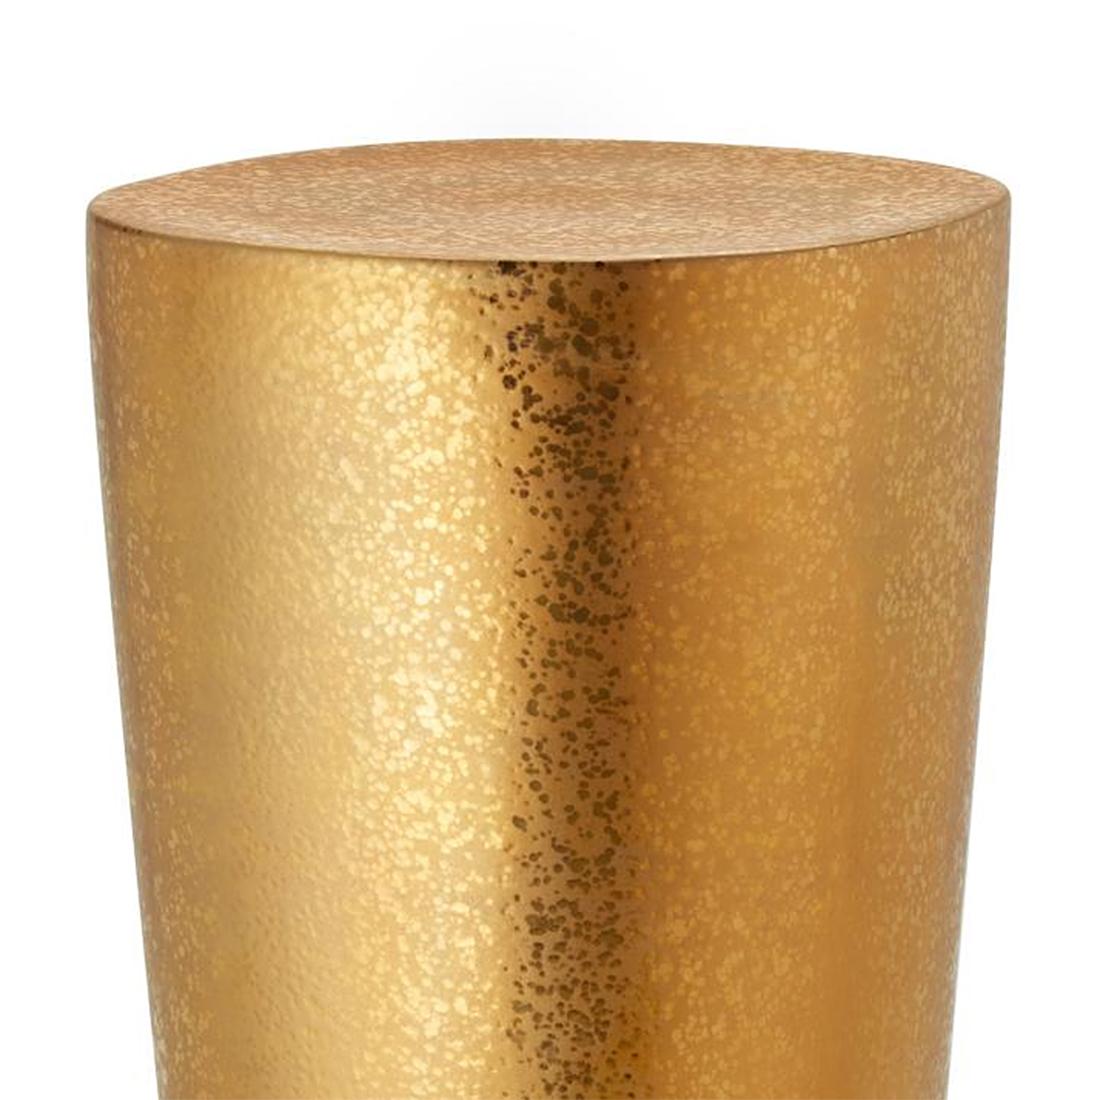 Stool golded earth in earthenware
in gold 24-karat finish.
Also available in Platine finish.